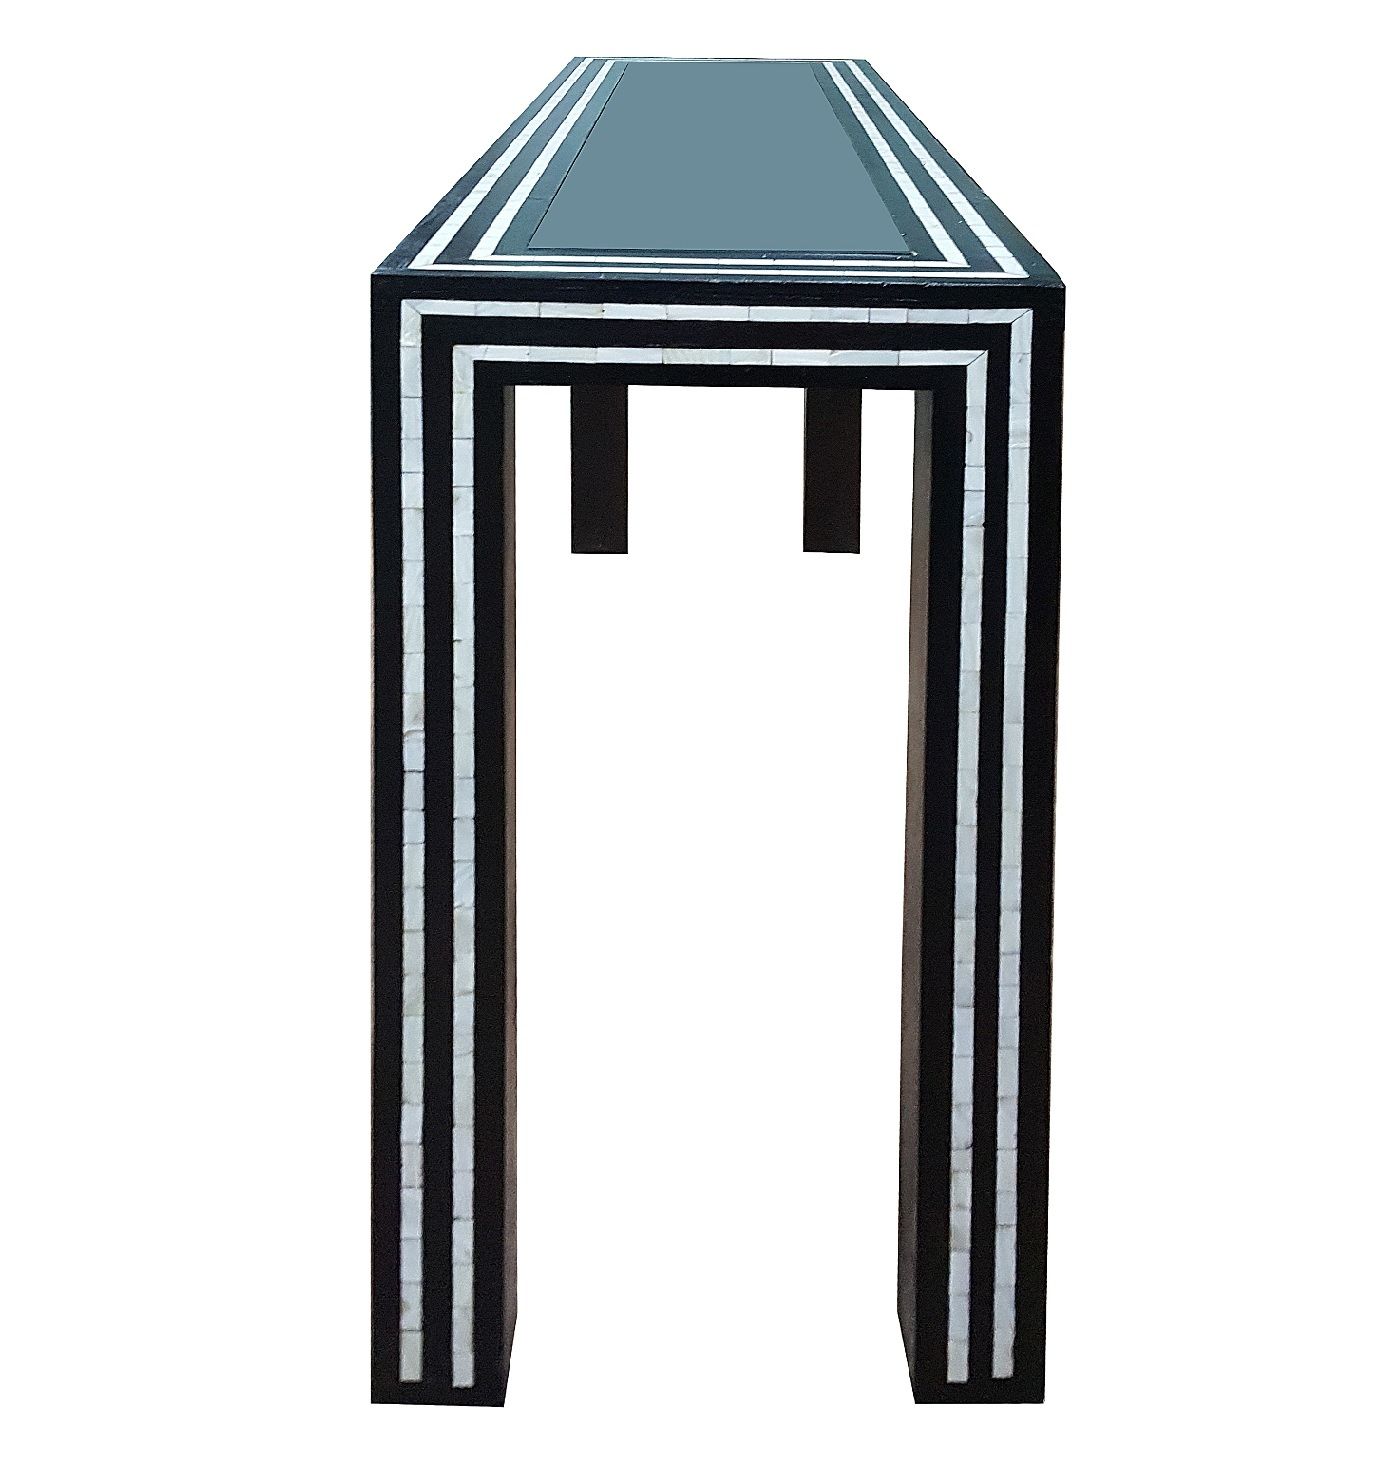 Black And White Pearl Inlay Console: Glass And Inlay Console Table Within Black And White Inlay Console Tables (View 20 of 30)